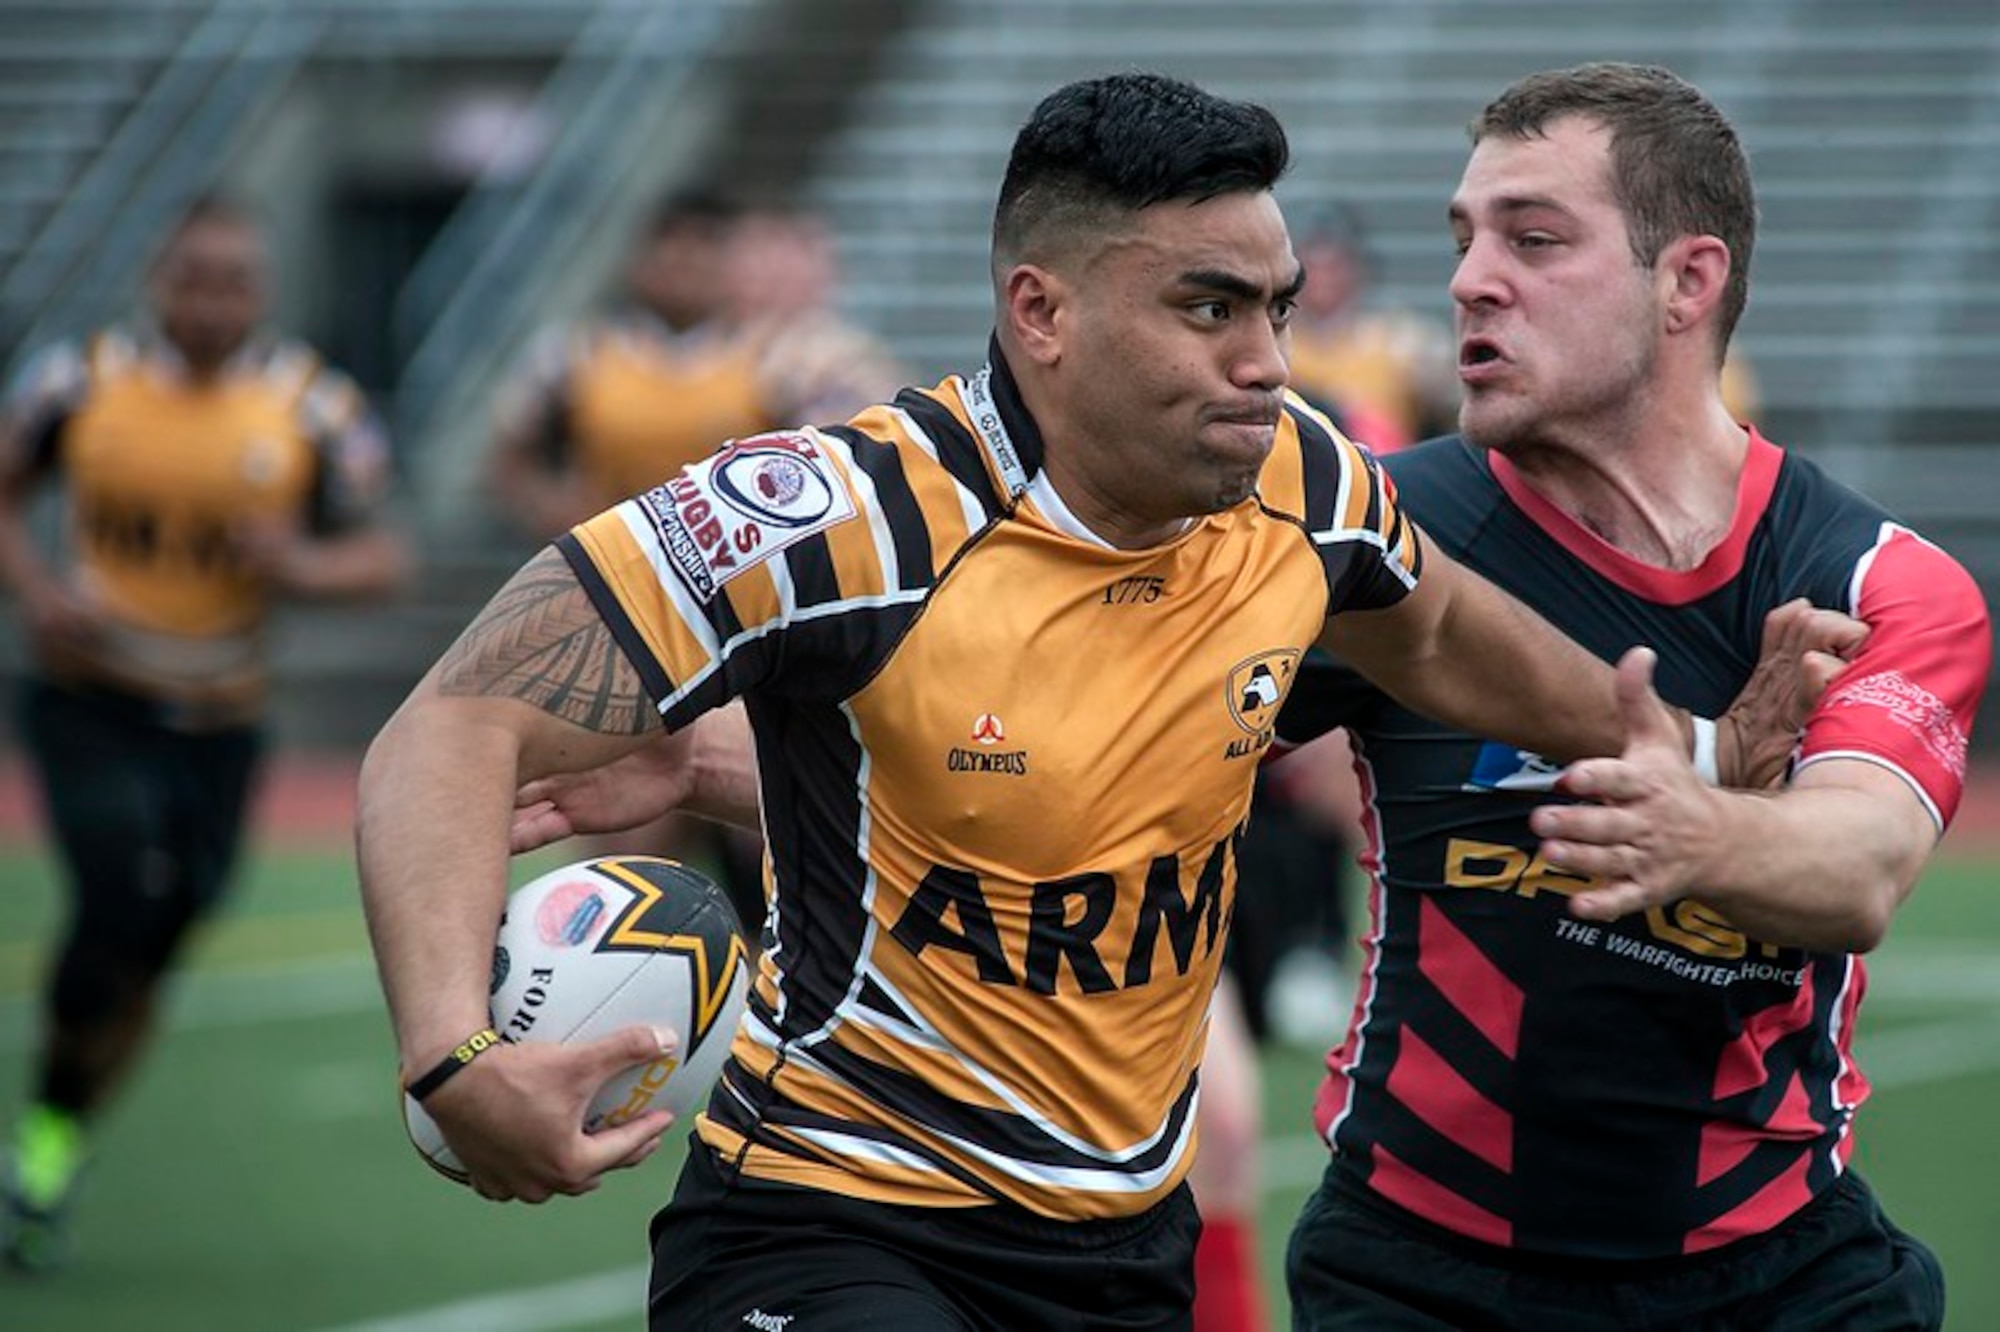 Army Rugby player in action.